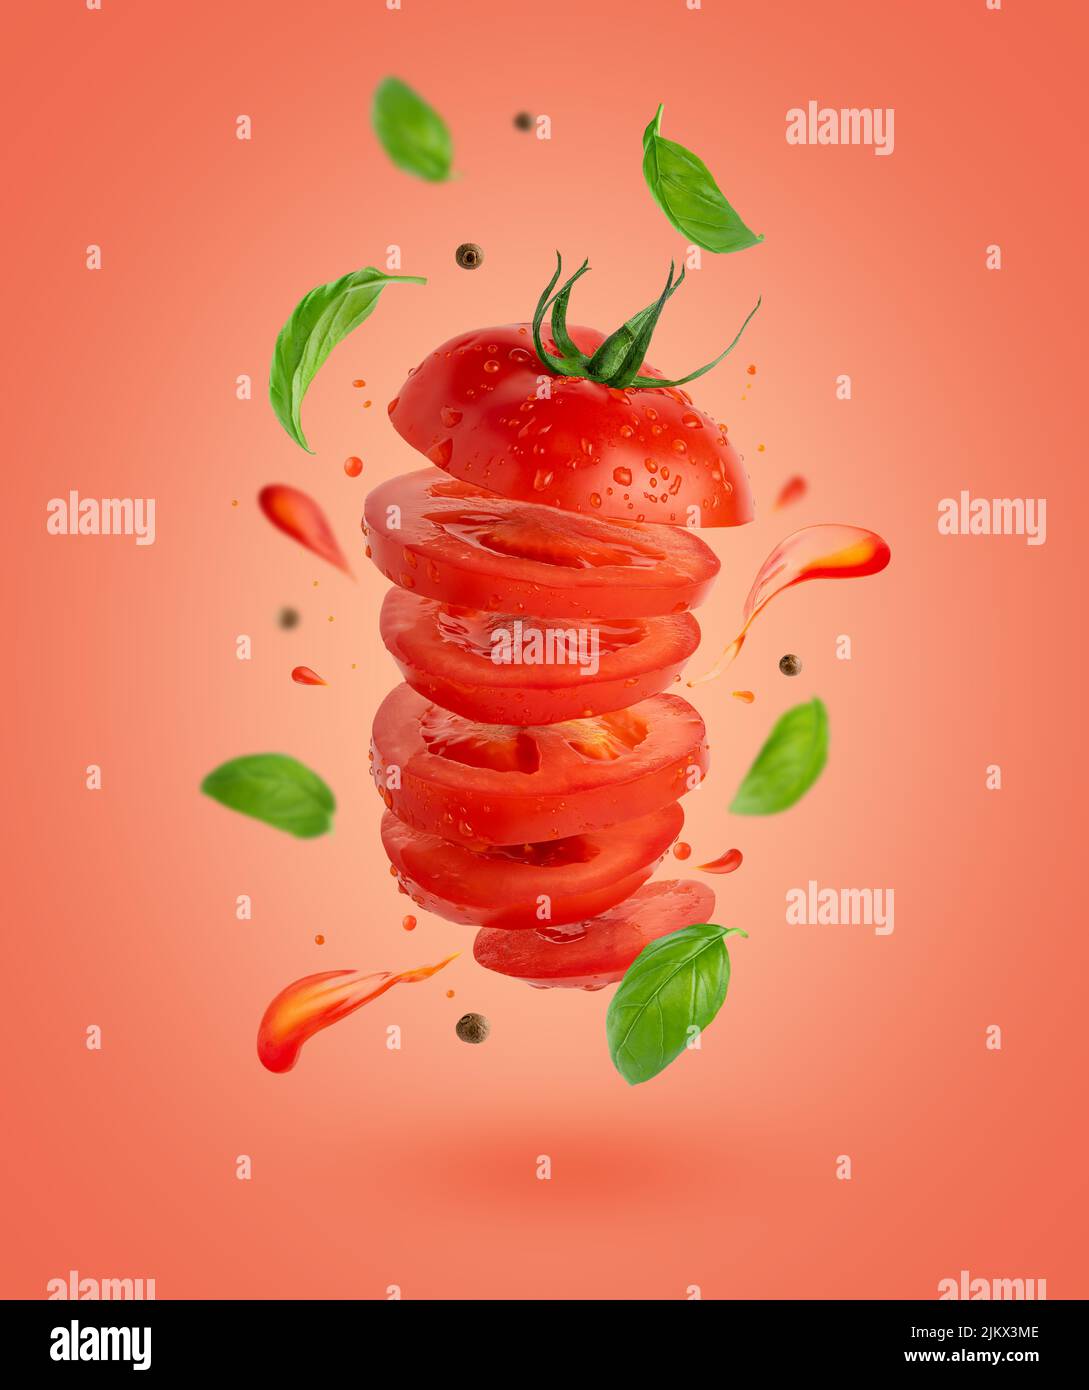 Flying sliced tomato with flowing splashes and basil leaves on red background. Stock Photo